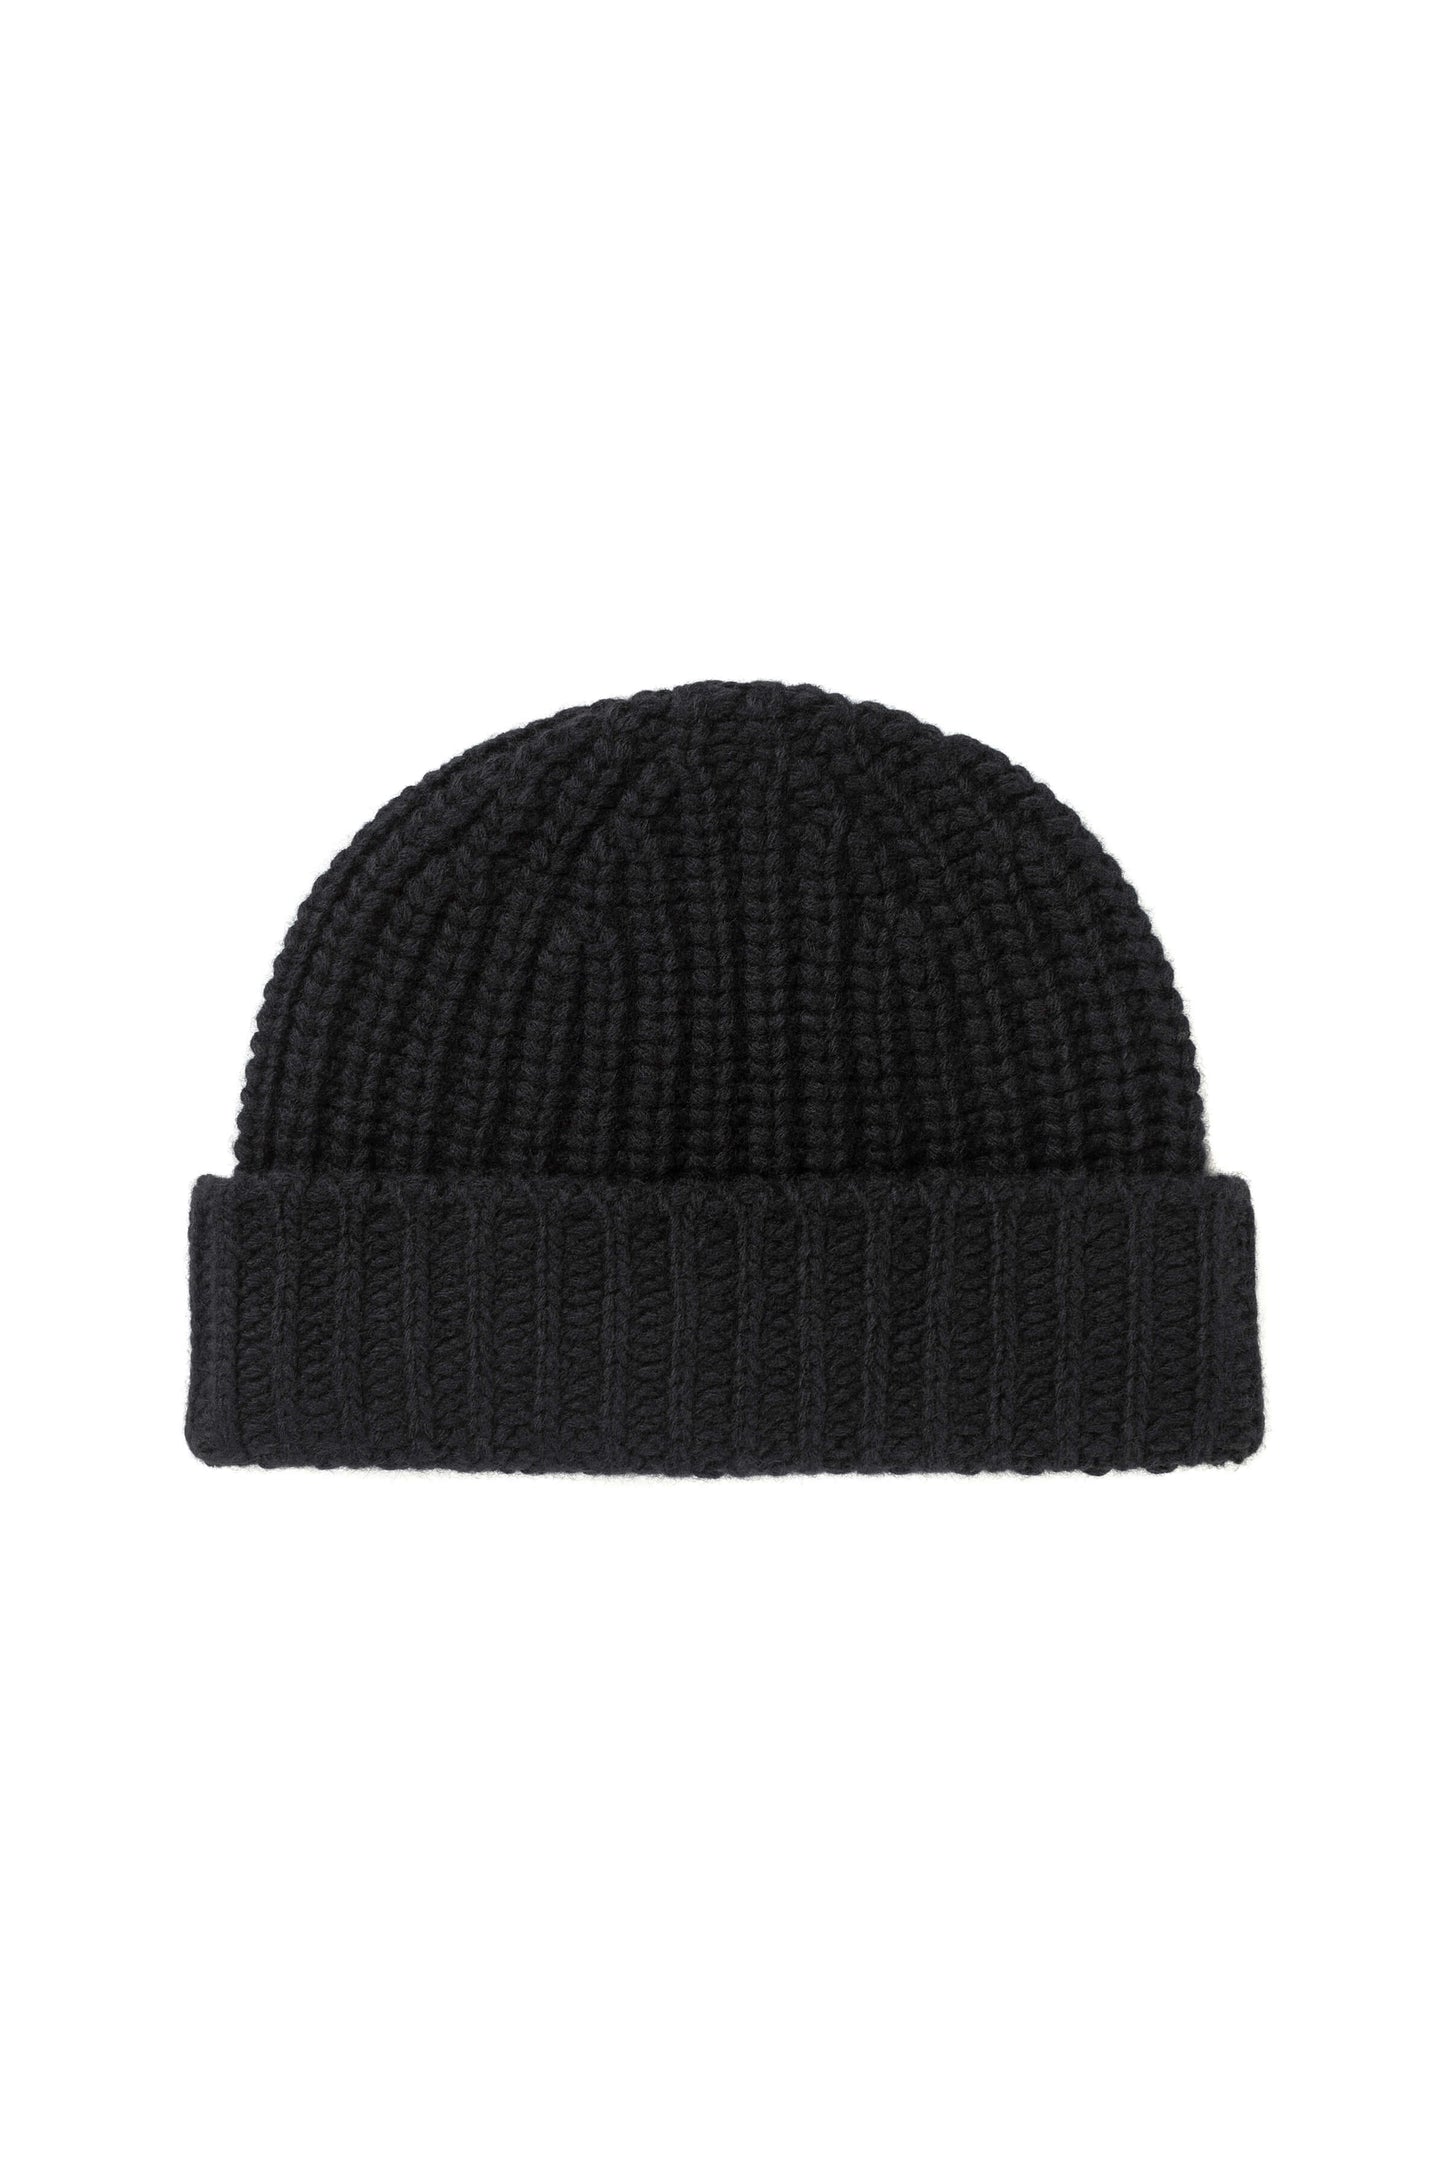 Johnstons of Elgin AW24 Knitted Accessory Black Chunky Rib Cashmere Beanie HAT02850SA0900ONE